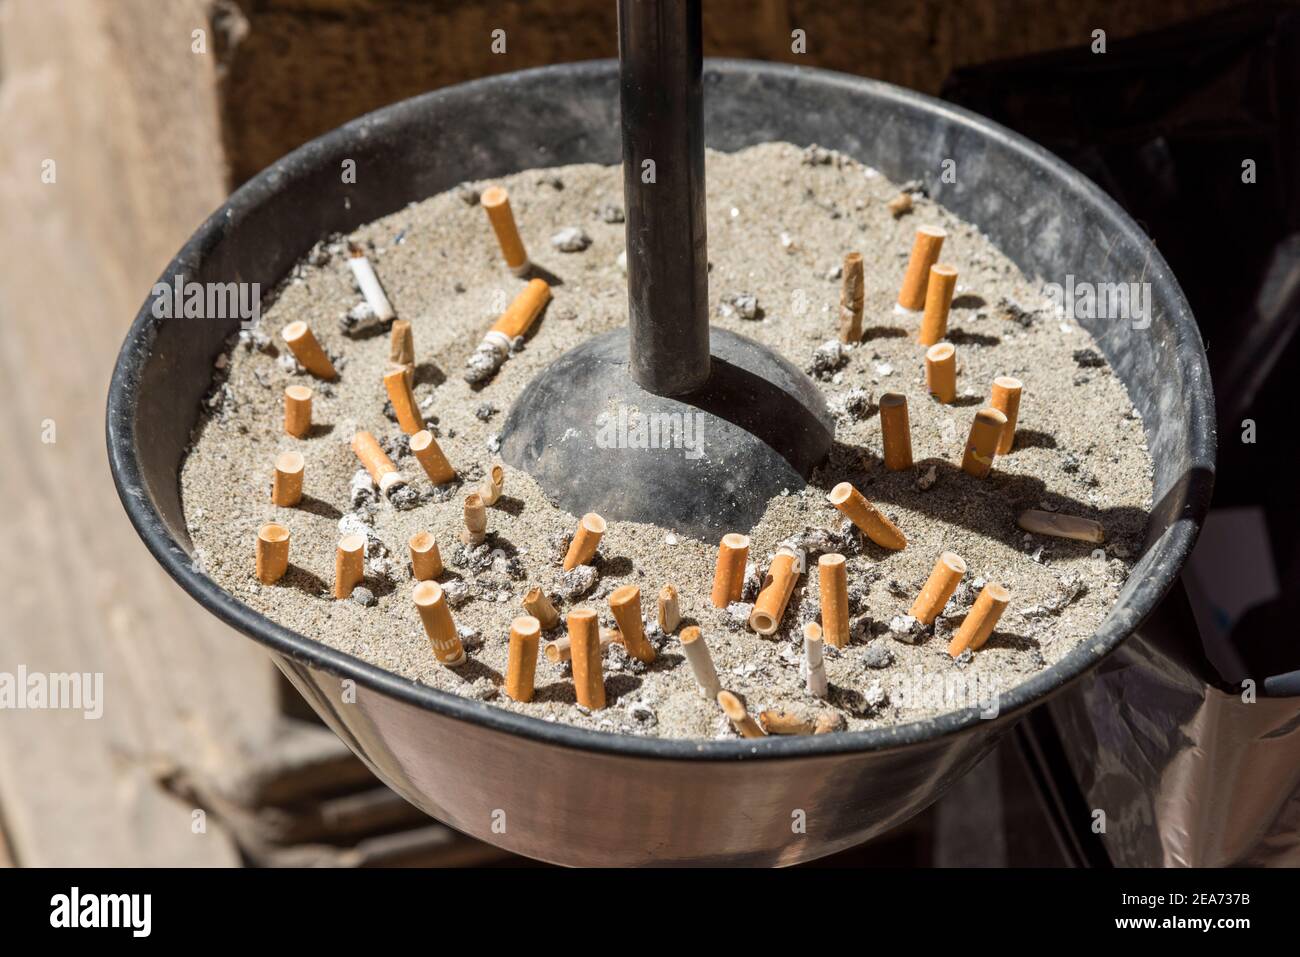 A round sand filled ashtray filled with extinguished cigarettes or dog ends Stock Photo